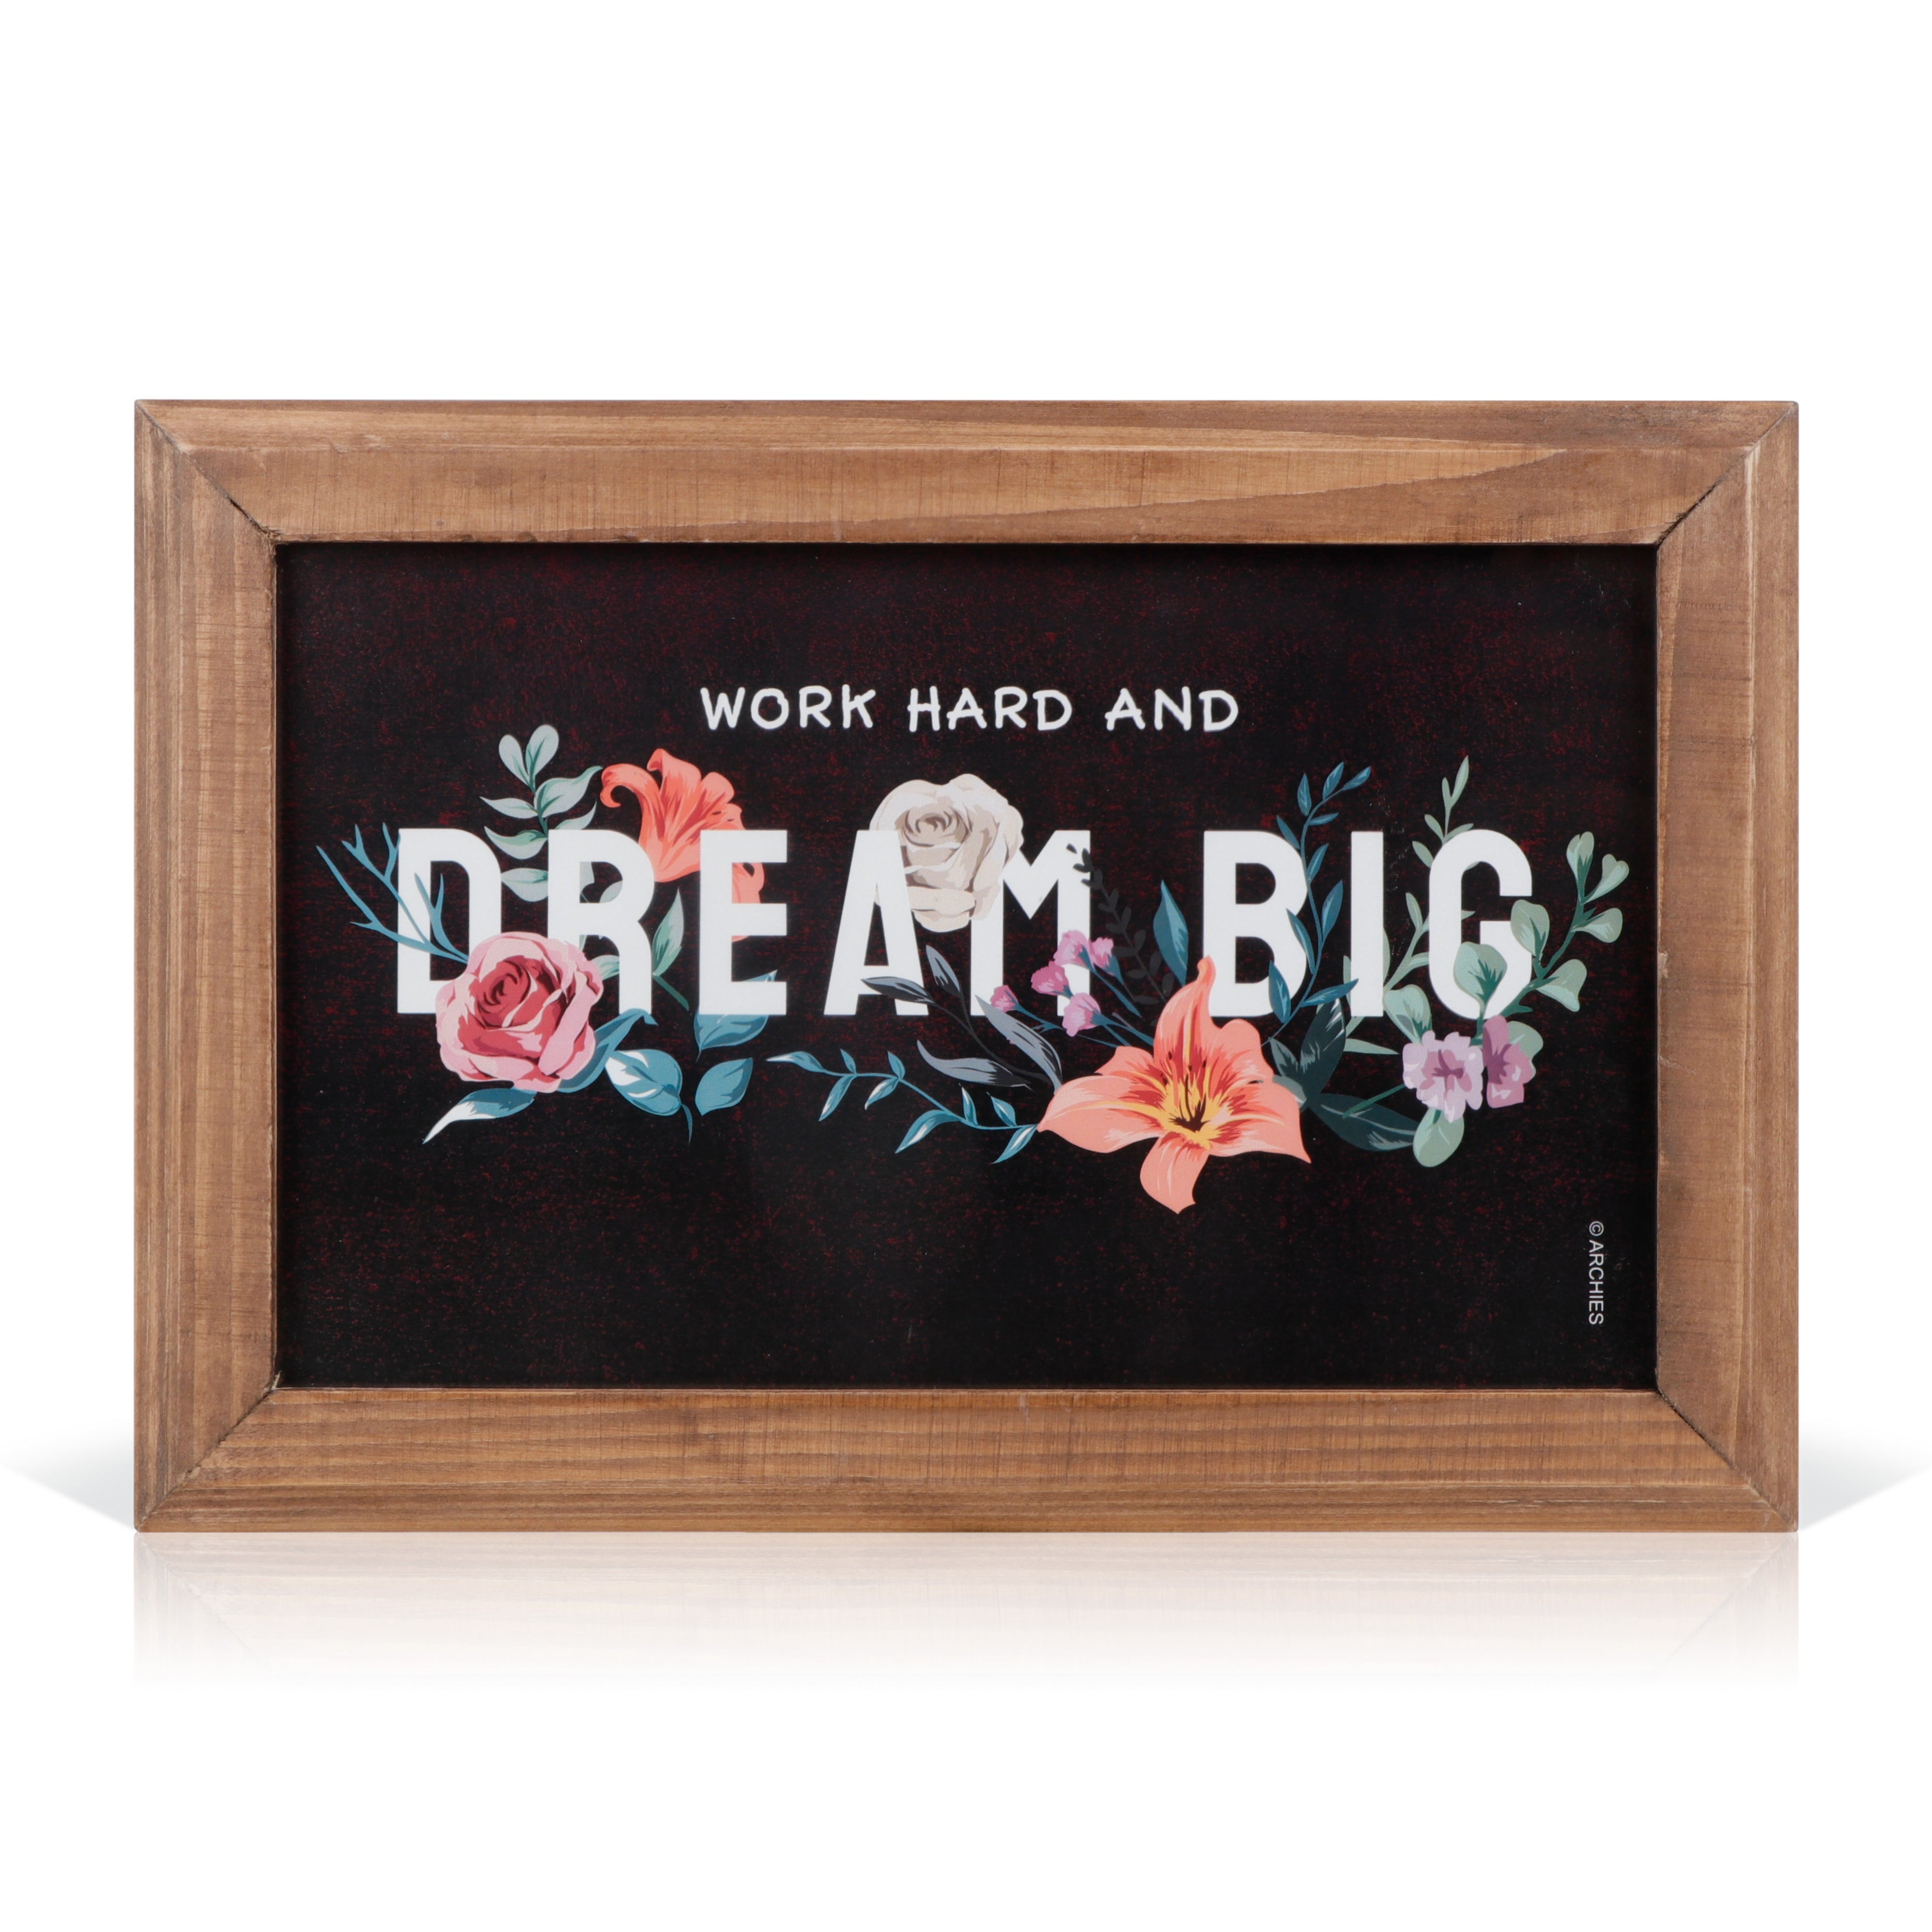 Archies KEEPSAKE QUOTATION- WORK HARD DREAM BIG For gifting and Home décor